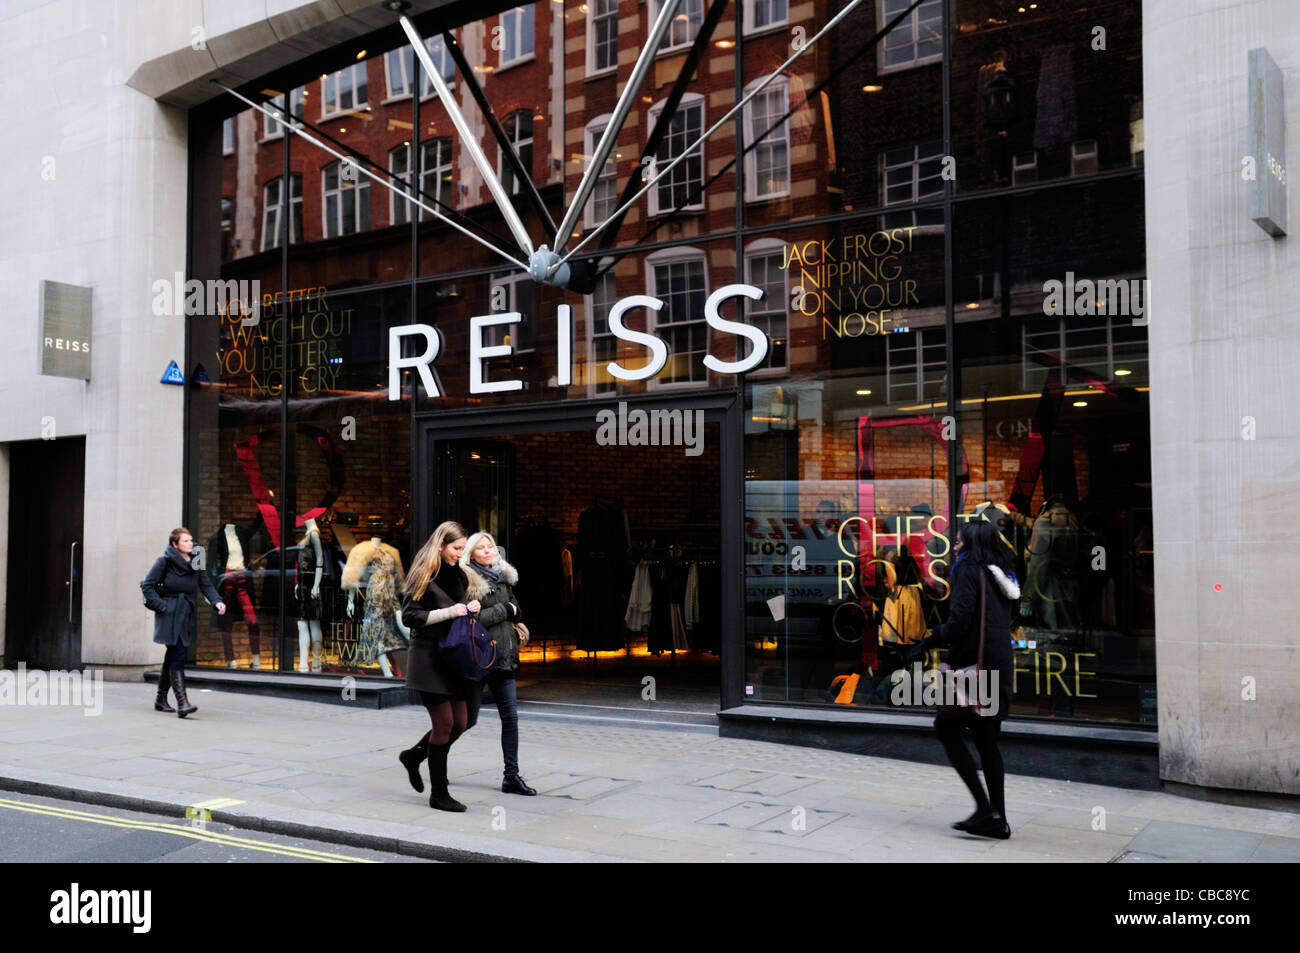 Reiss Women's Clothing and Accessories Shop, Long Acre, Covent Garden, London, England, UK Stock Photo